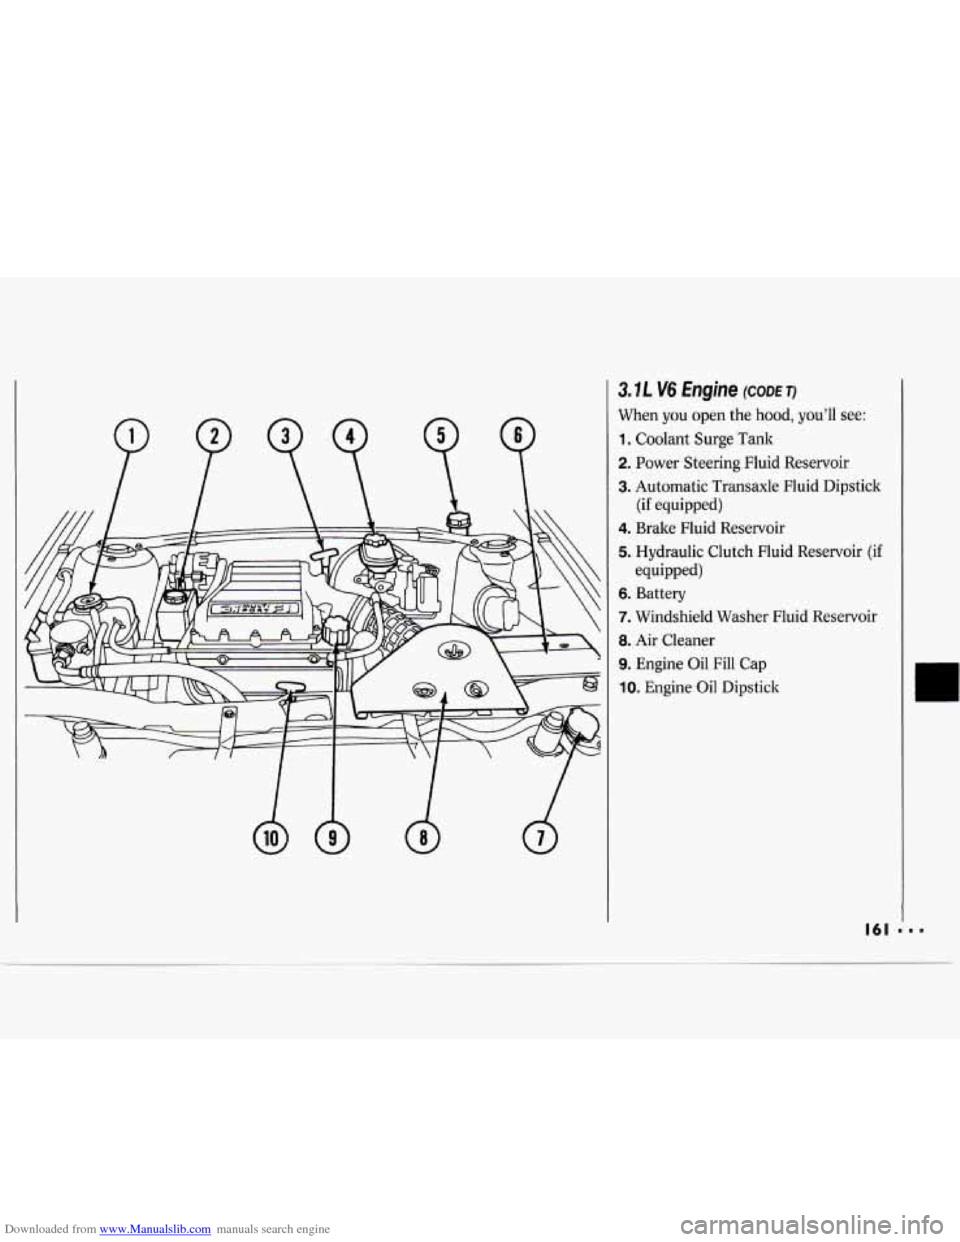 CHEVROLET CAVALIER 1994 1.G Owners Manual Downloaded from www.Manualslib.com manuals search engine 3.7L V6 Engine (CODE TI 
When you open the hood,  you’ll  see: 
1. Coolant  Surge  Tank 
2. Power Steering  Fluid  Reservoir 
3. Automatic Tr